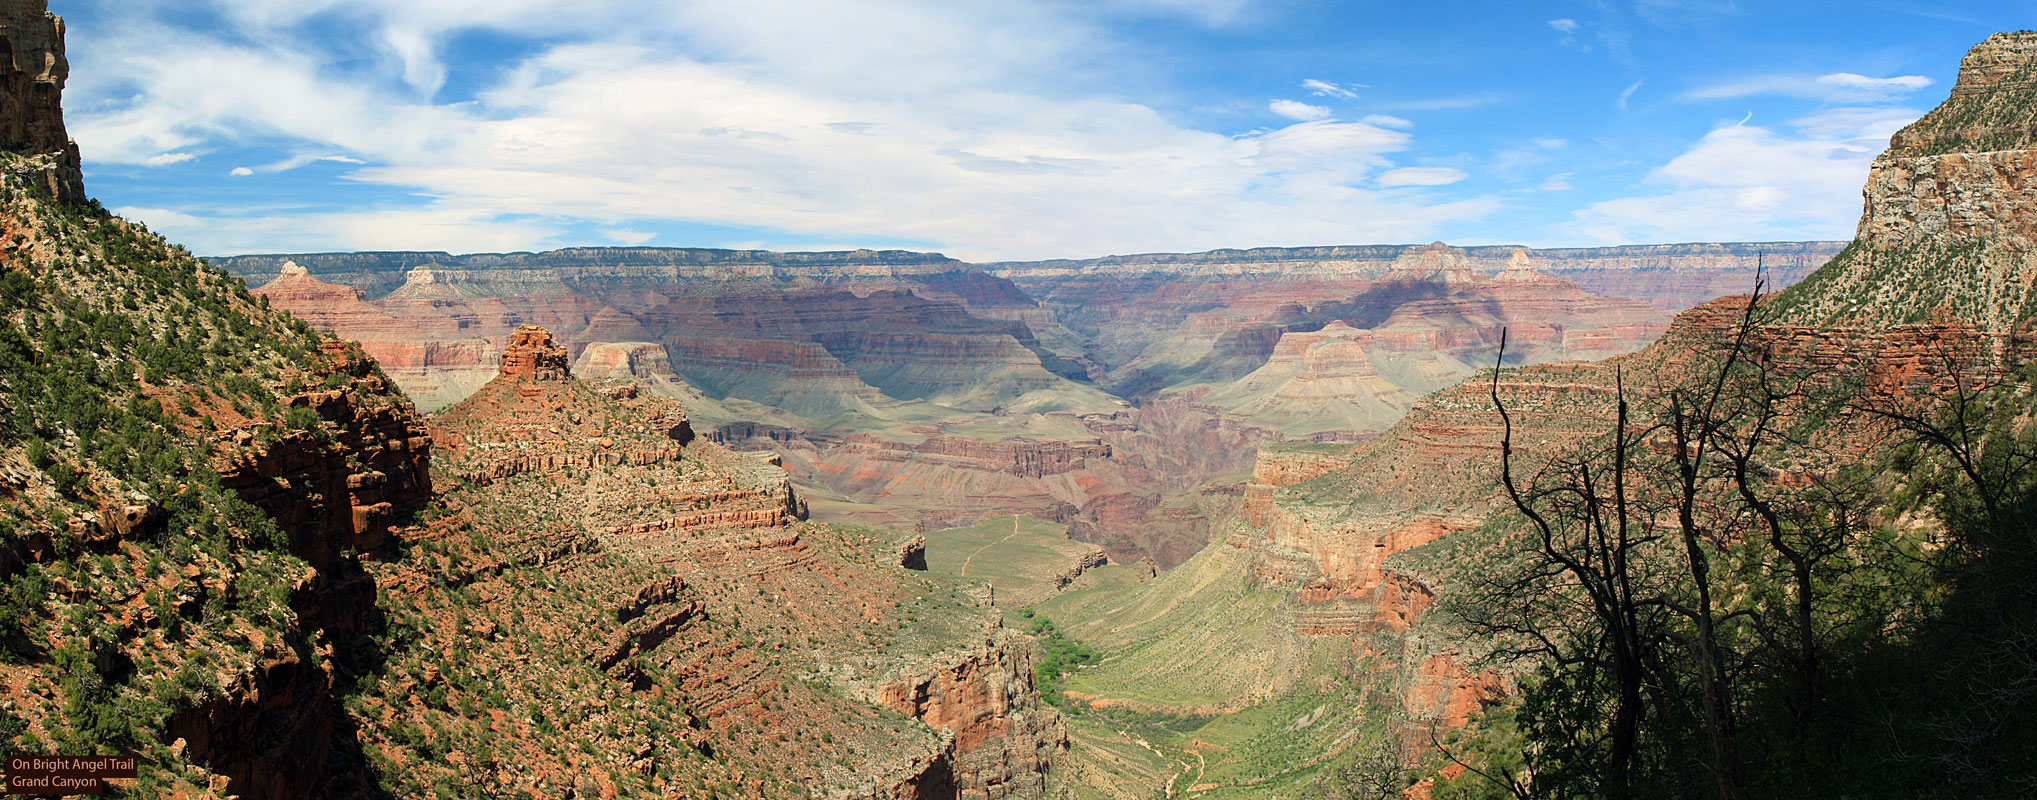 View from Bright Angel Trail